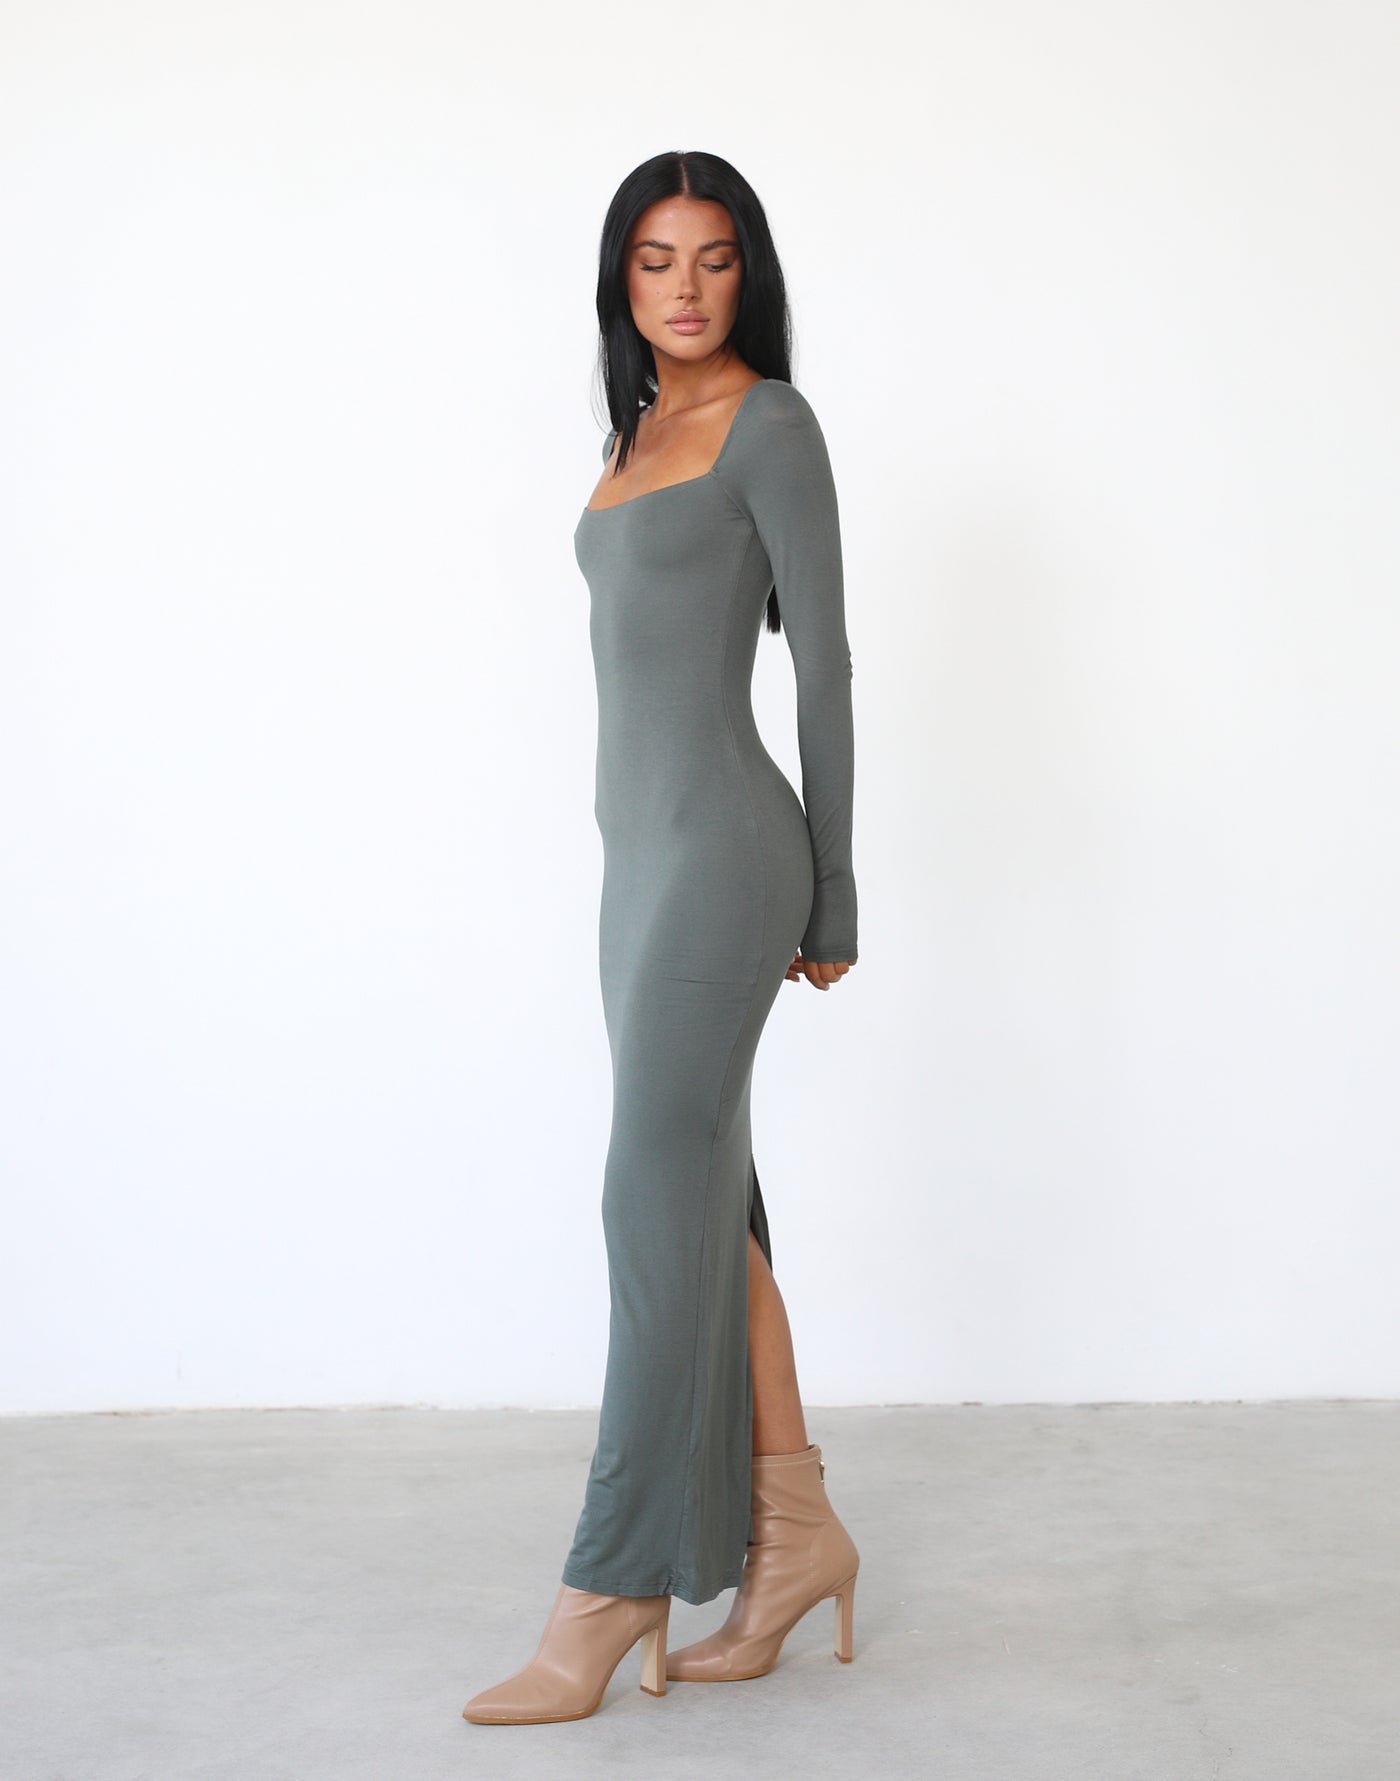 Eyes On Me Maxi Dress (Khaki) - Long Sleeved Fitted Square Neck Maxi - Women's Dress - Charcoal Clothing